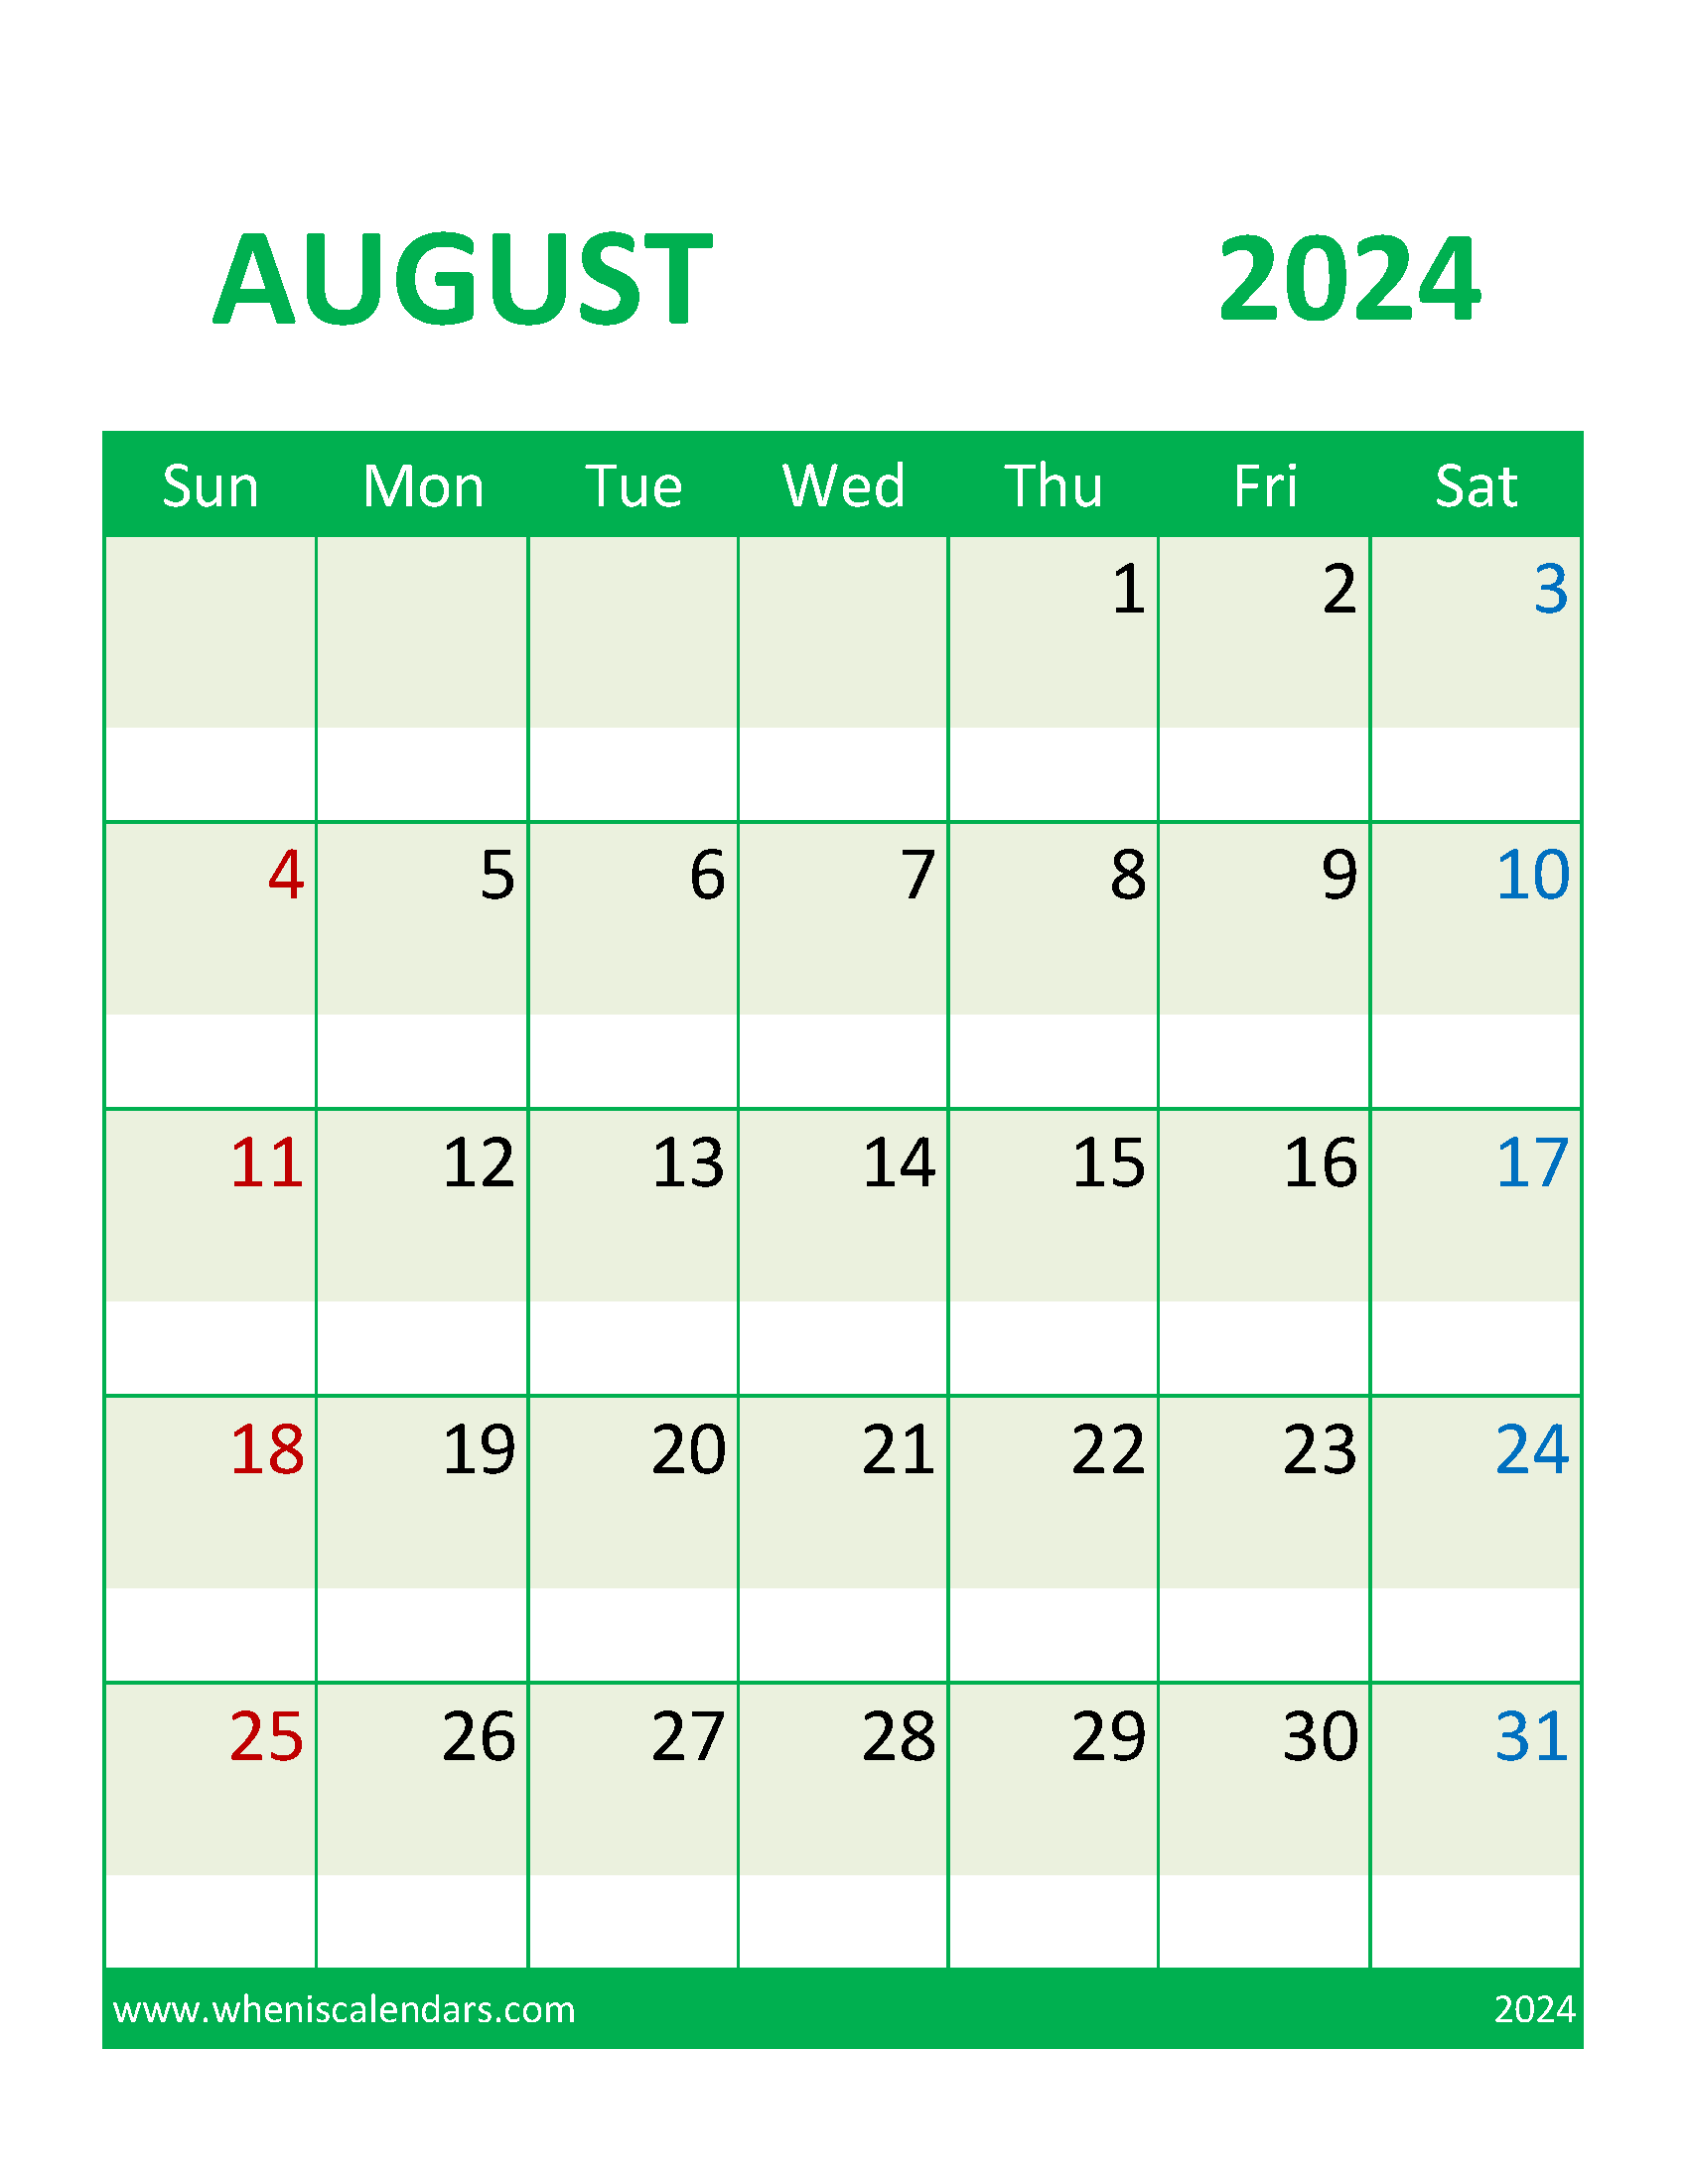 August 2024 Calendar Printable Free with Holidays Monthly Calendar